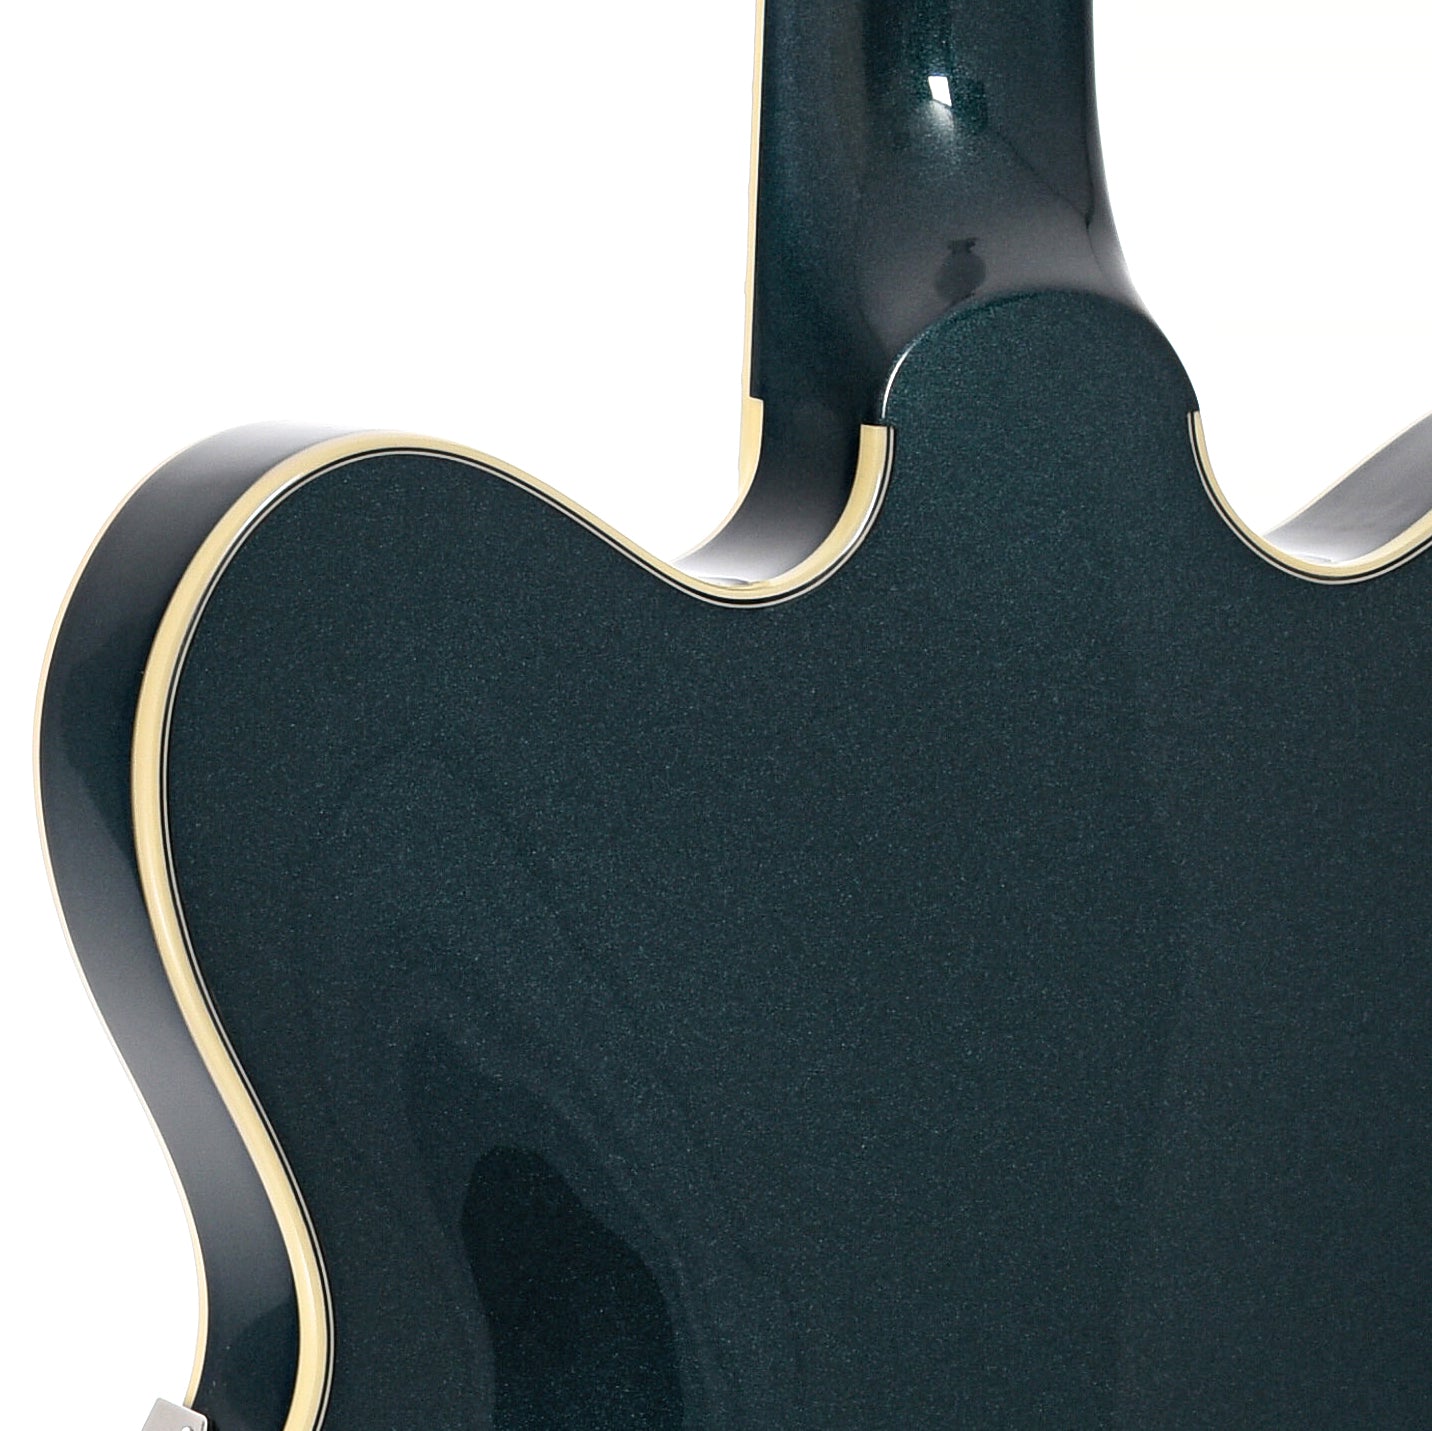 Image 9 of Gretsch G2622 Streamliner Center-Block Double Cutaway Hollow Body Guitar, Midnight Sapphire- SKU# G2622-MDSPH : Product Type Hollow Body Electric Guitars : Elderly Instruments